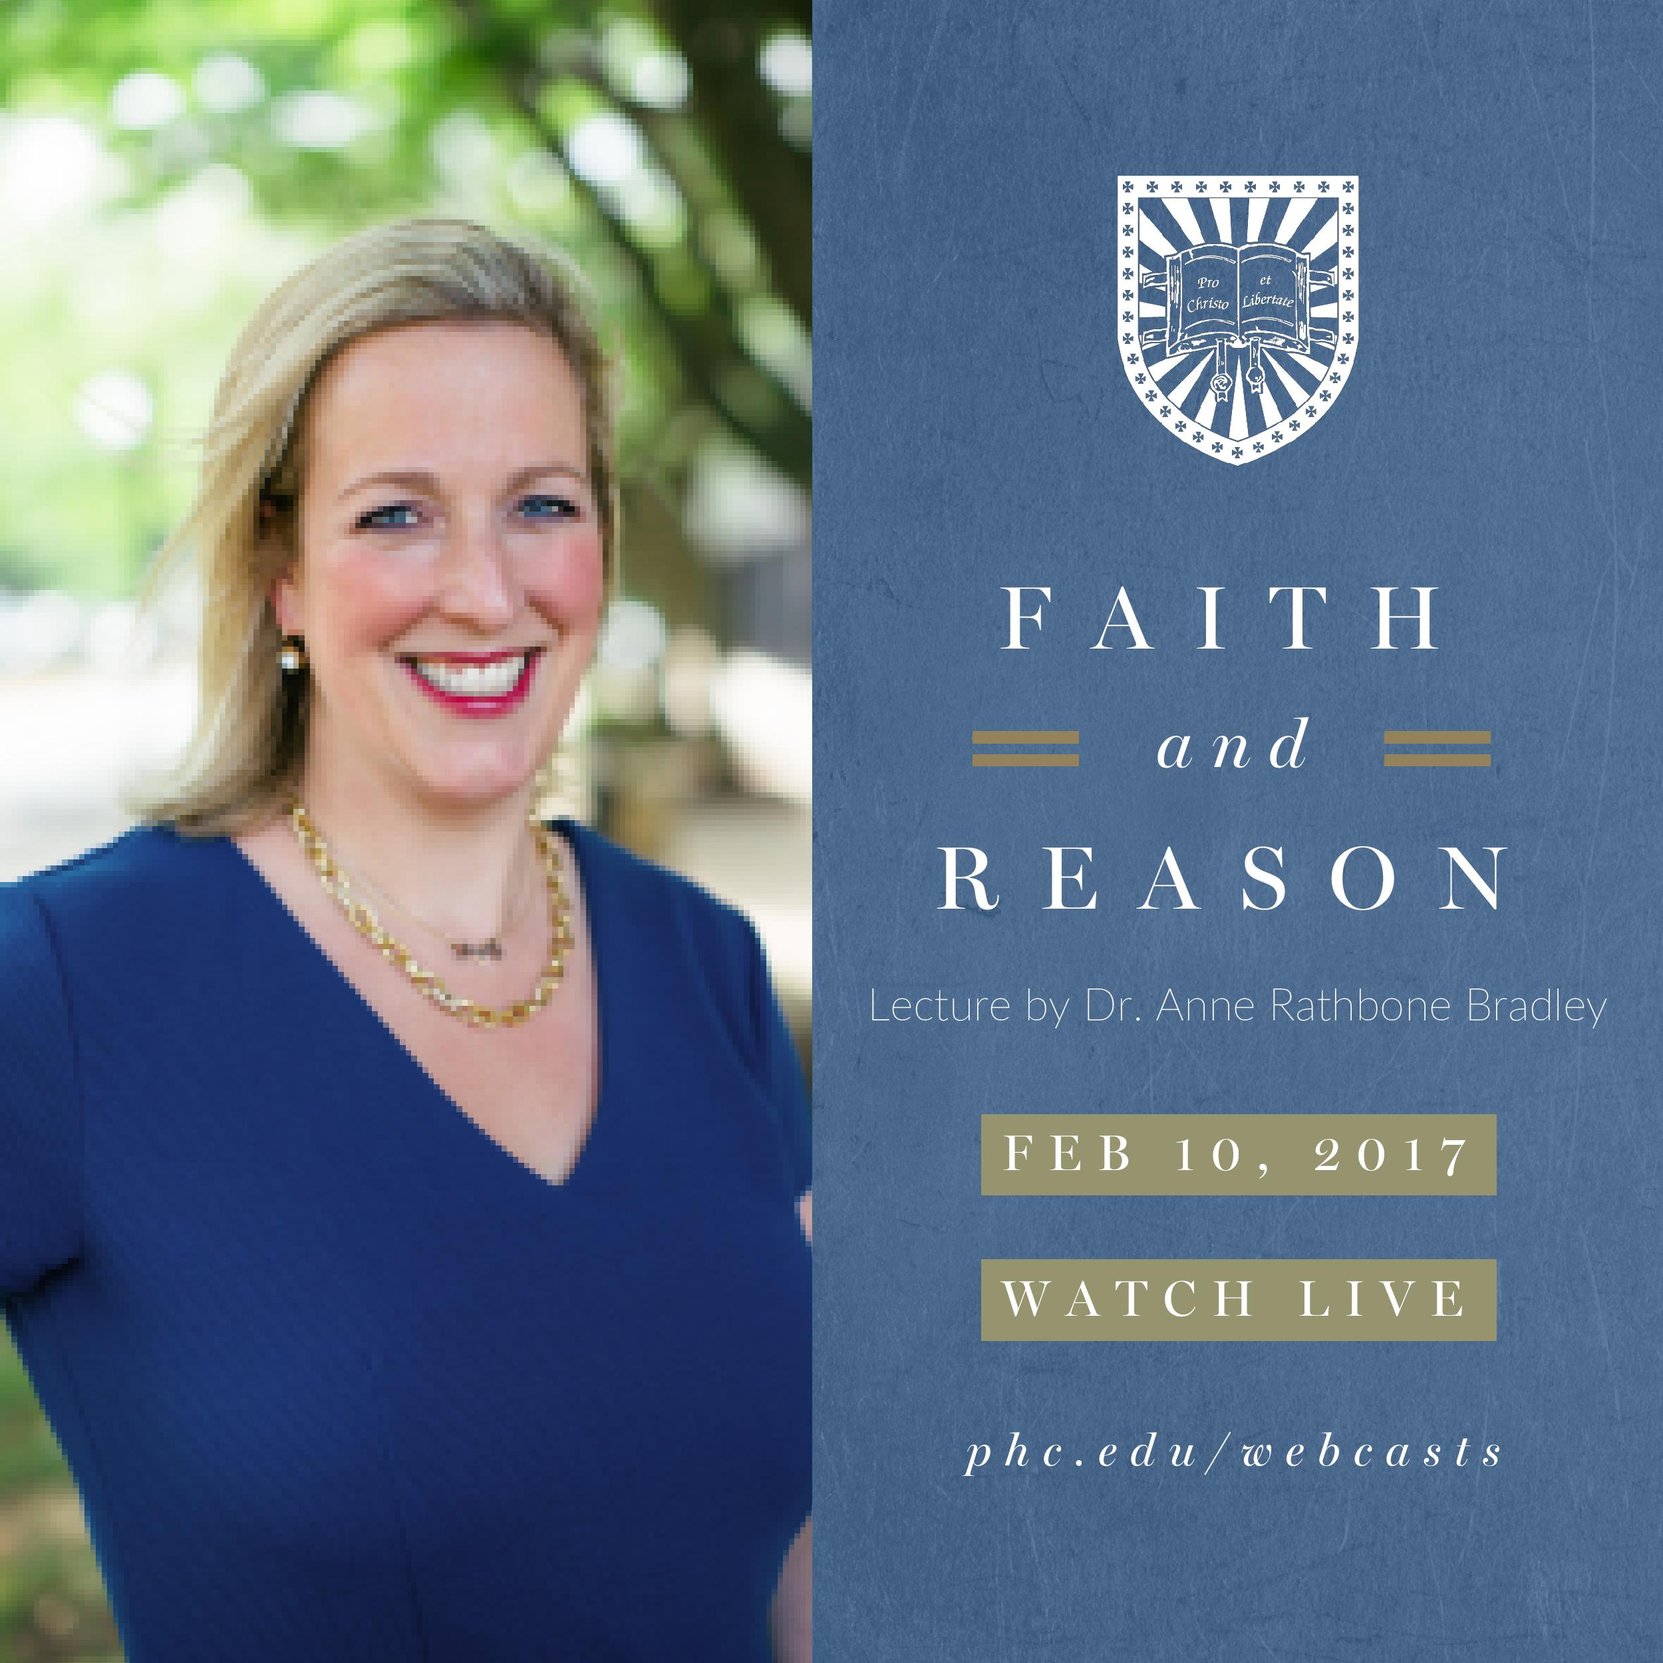 Patrick Henry College (PHC) Faith and Reason spring 2017 lecture by Dr. Anne Rathbone Bradley